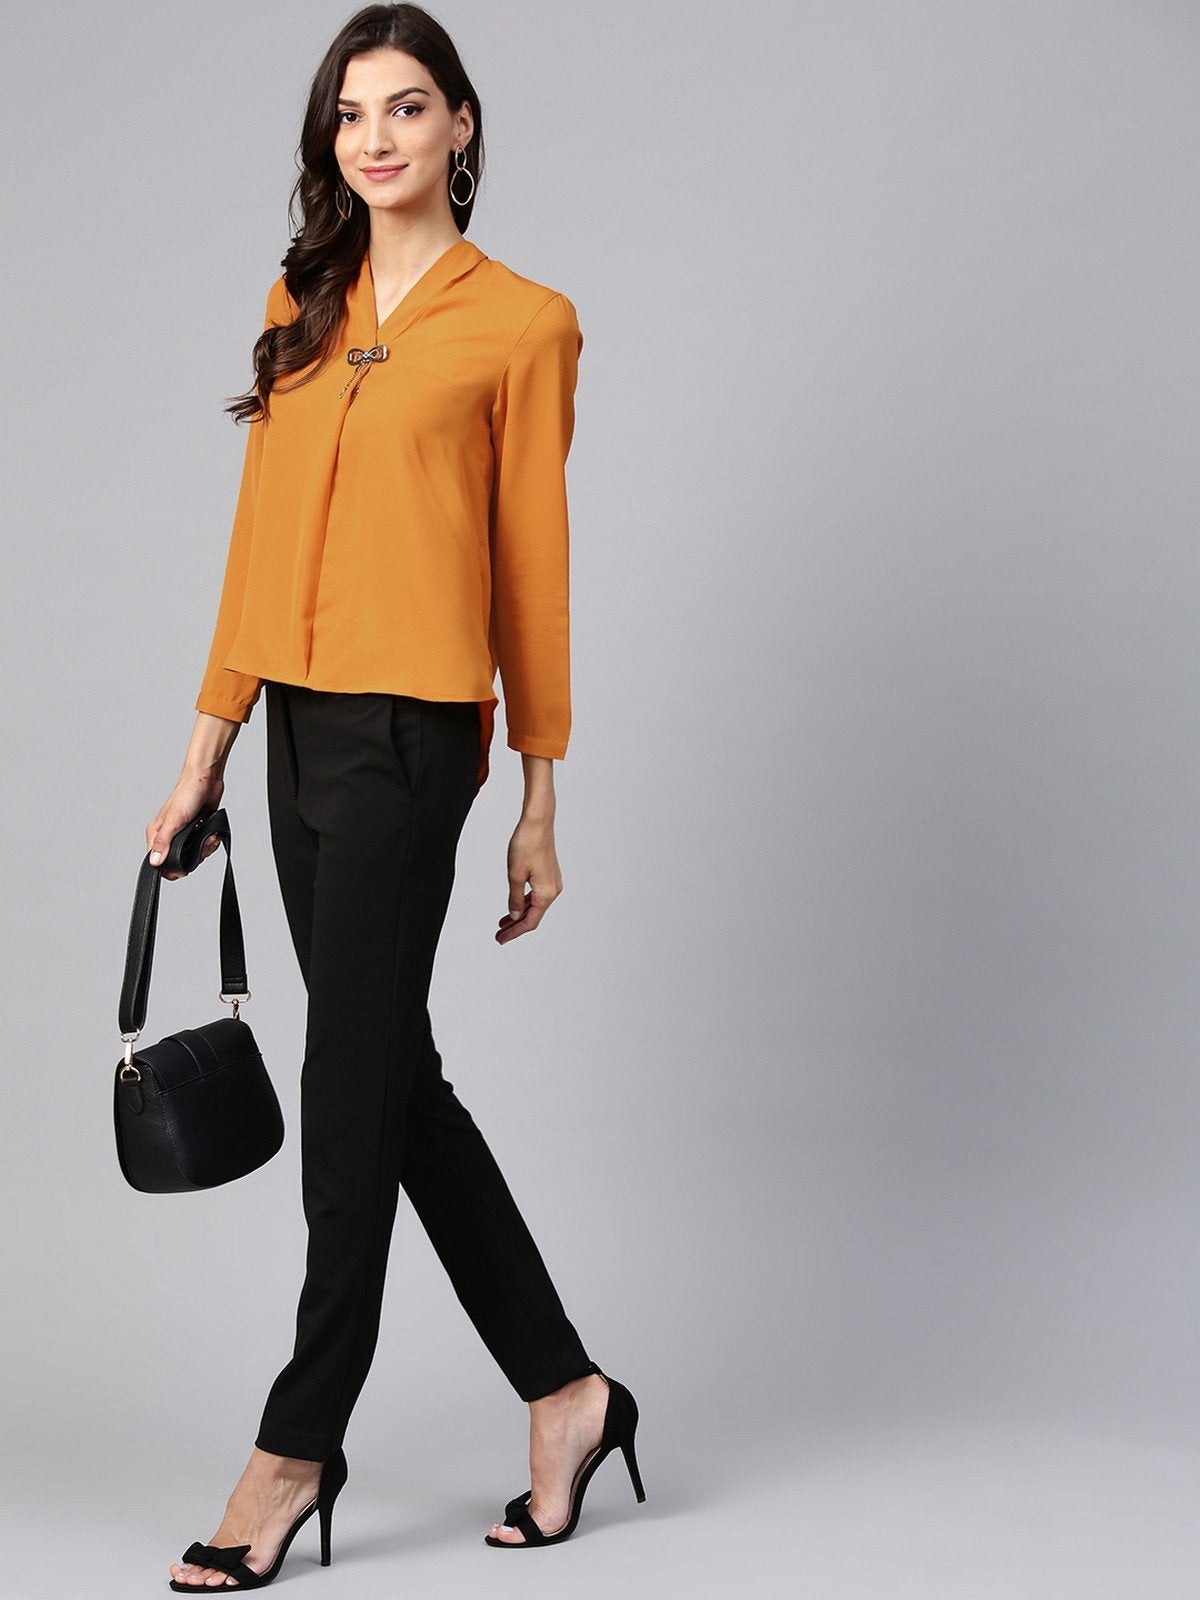 Women's Solid Top With Front Brotch - Pannkh